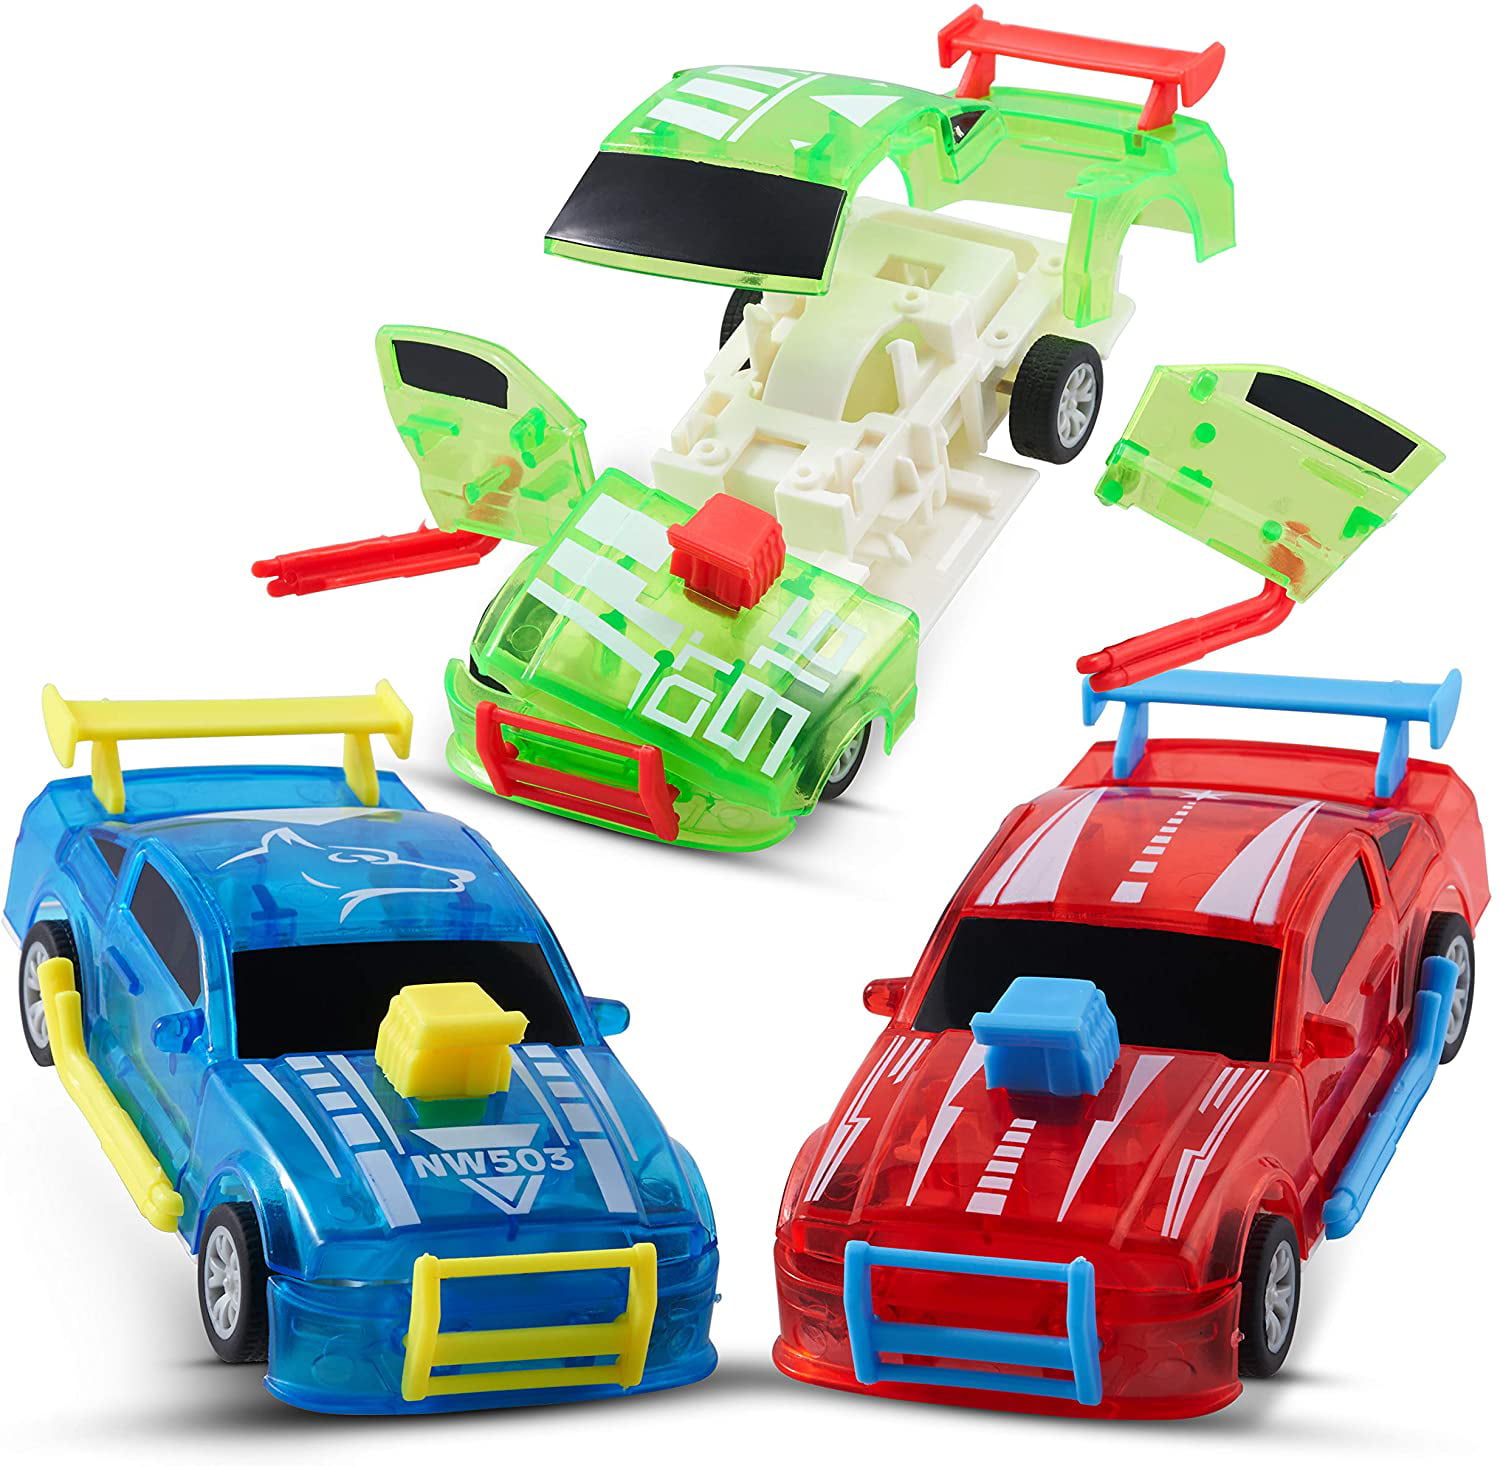 Syolee 30 Pack Pull Back Vehicles Friction Powered Car Toys Mini Assorted Vehicles Race Car Toy Party Favors Cake Decorations for Kids Toddlers Boys Child